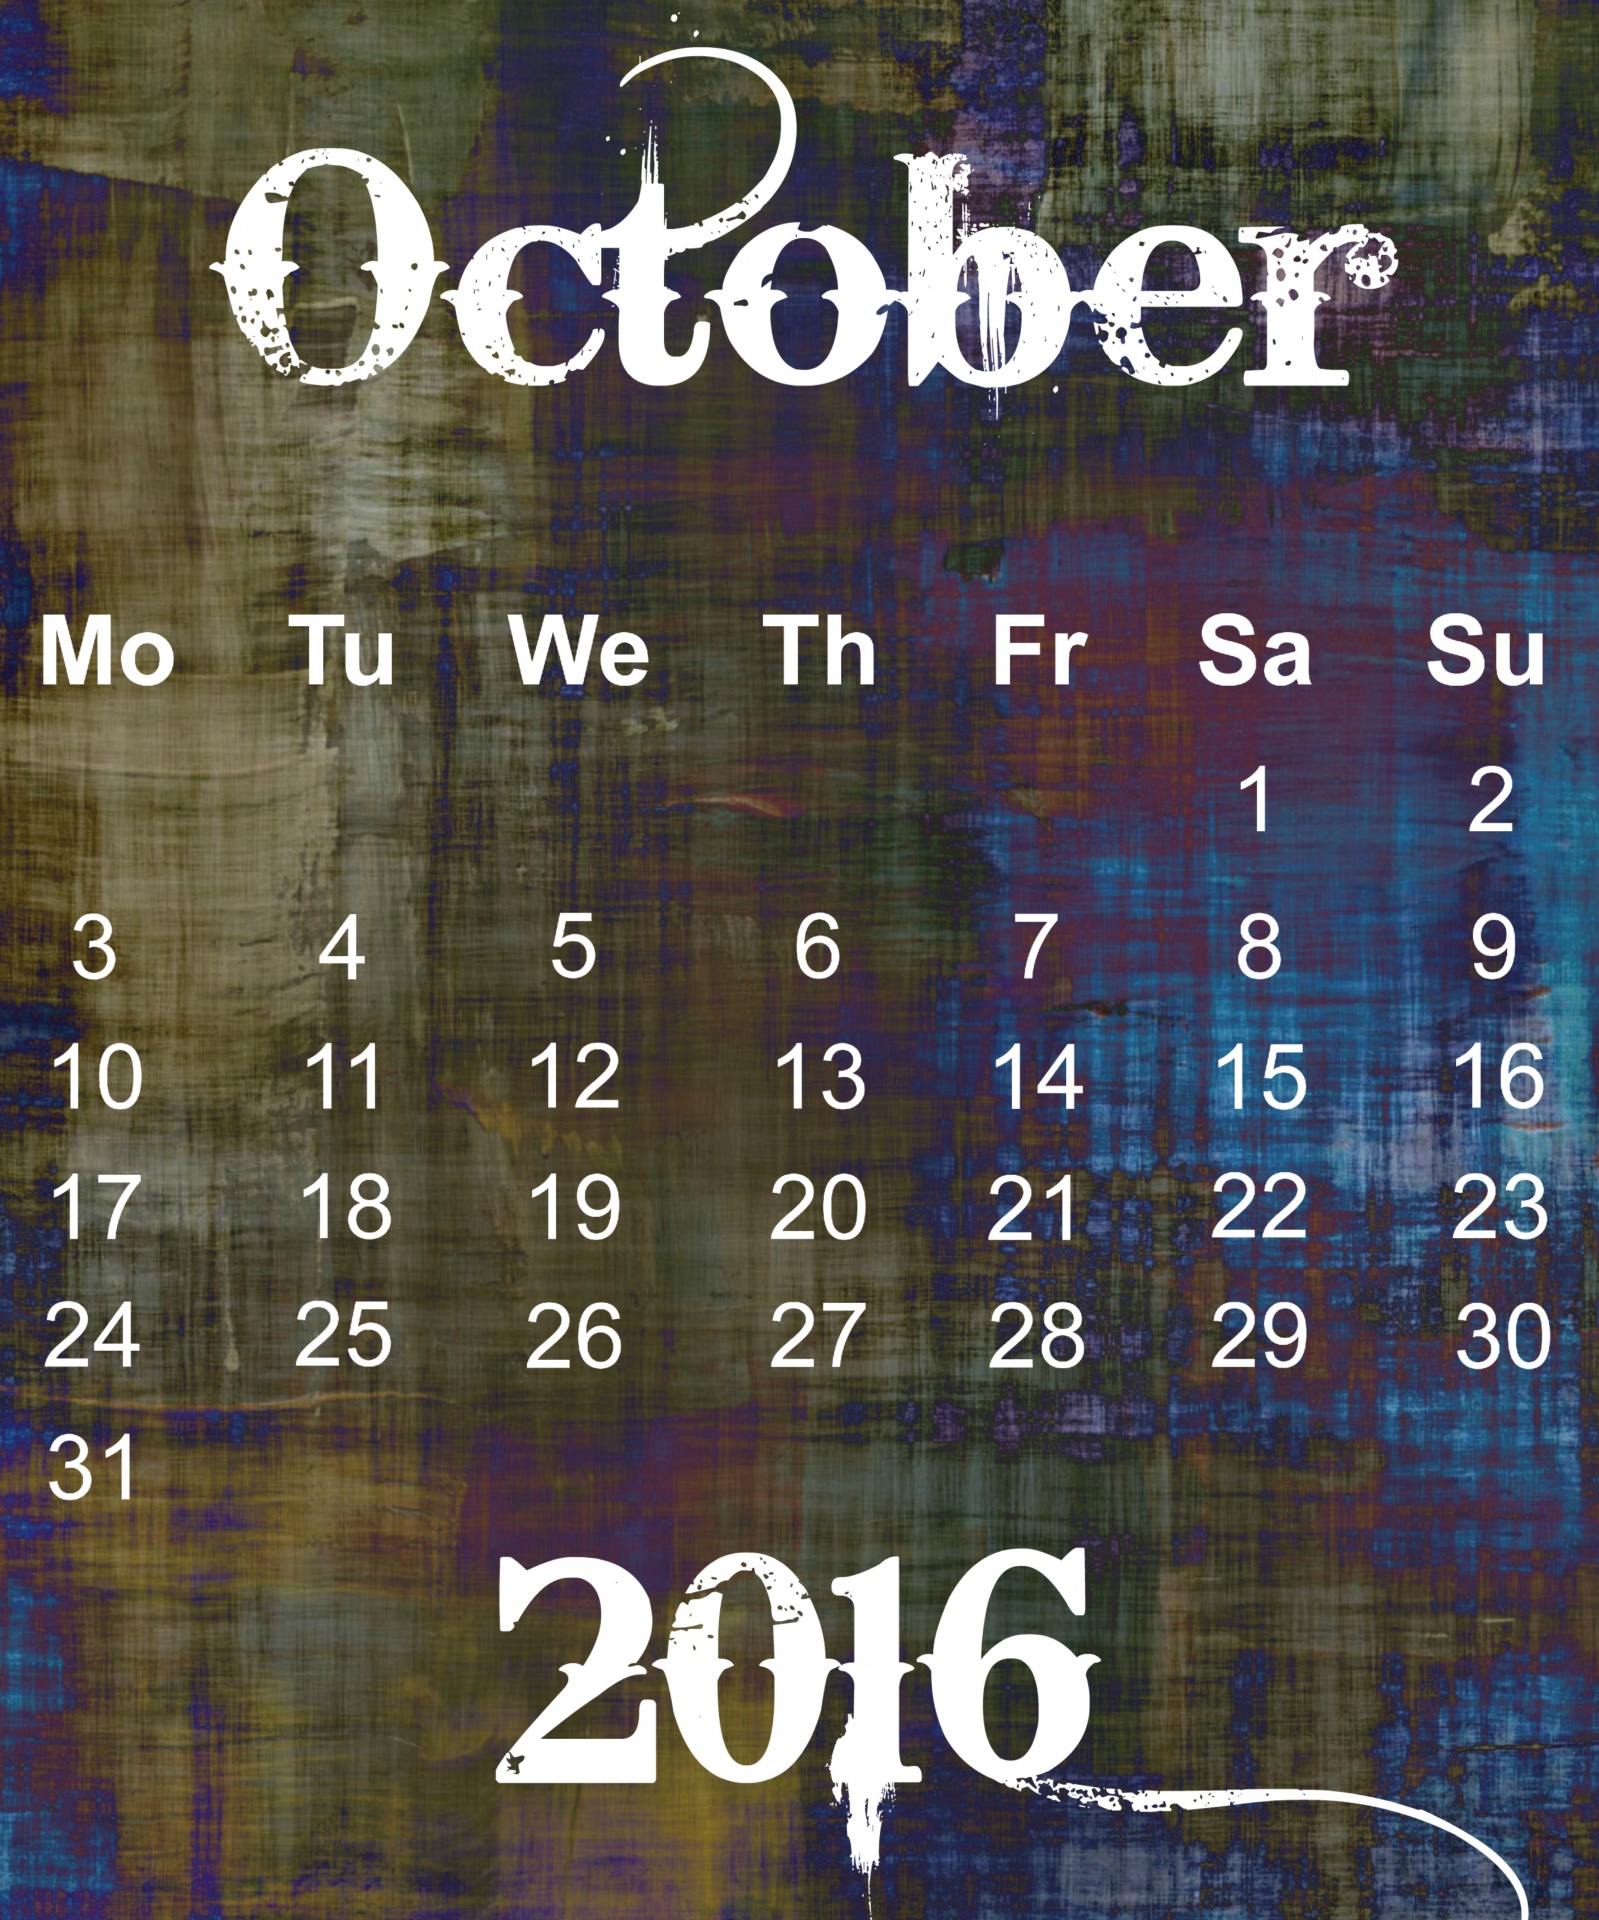 october-2016-grunge-calendar-free-stock-photo-public-domain-pictures